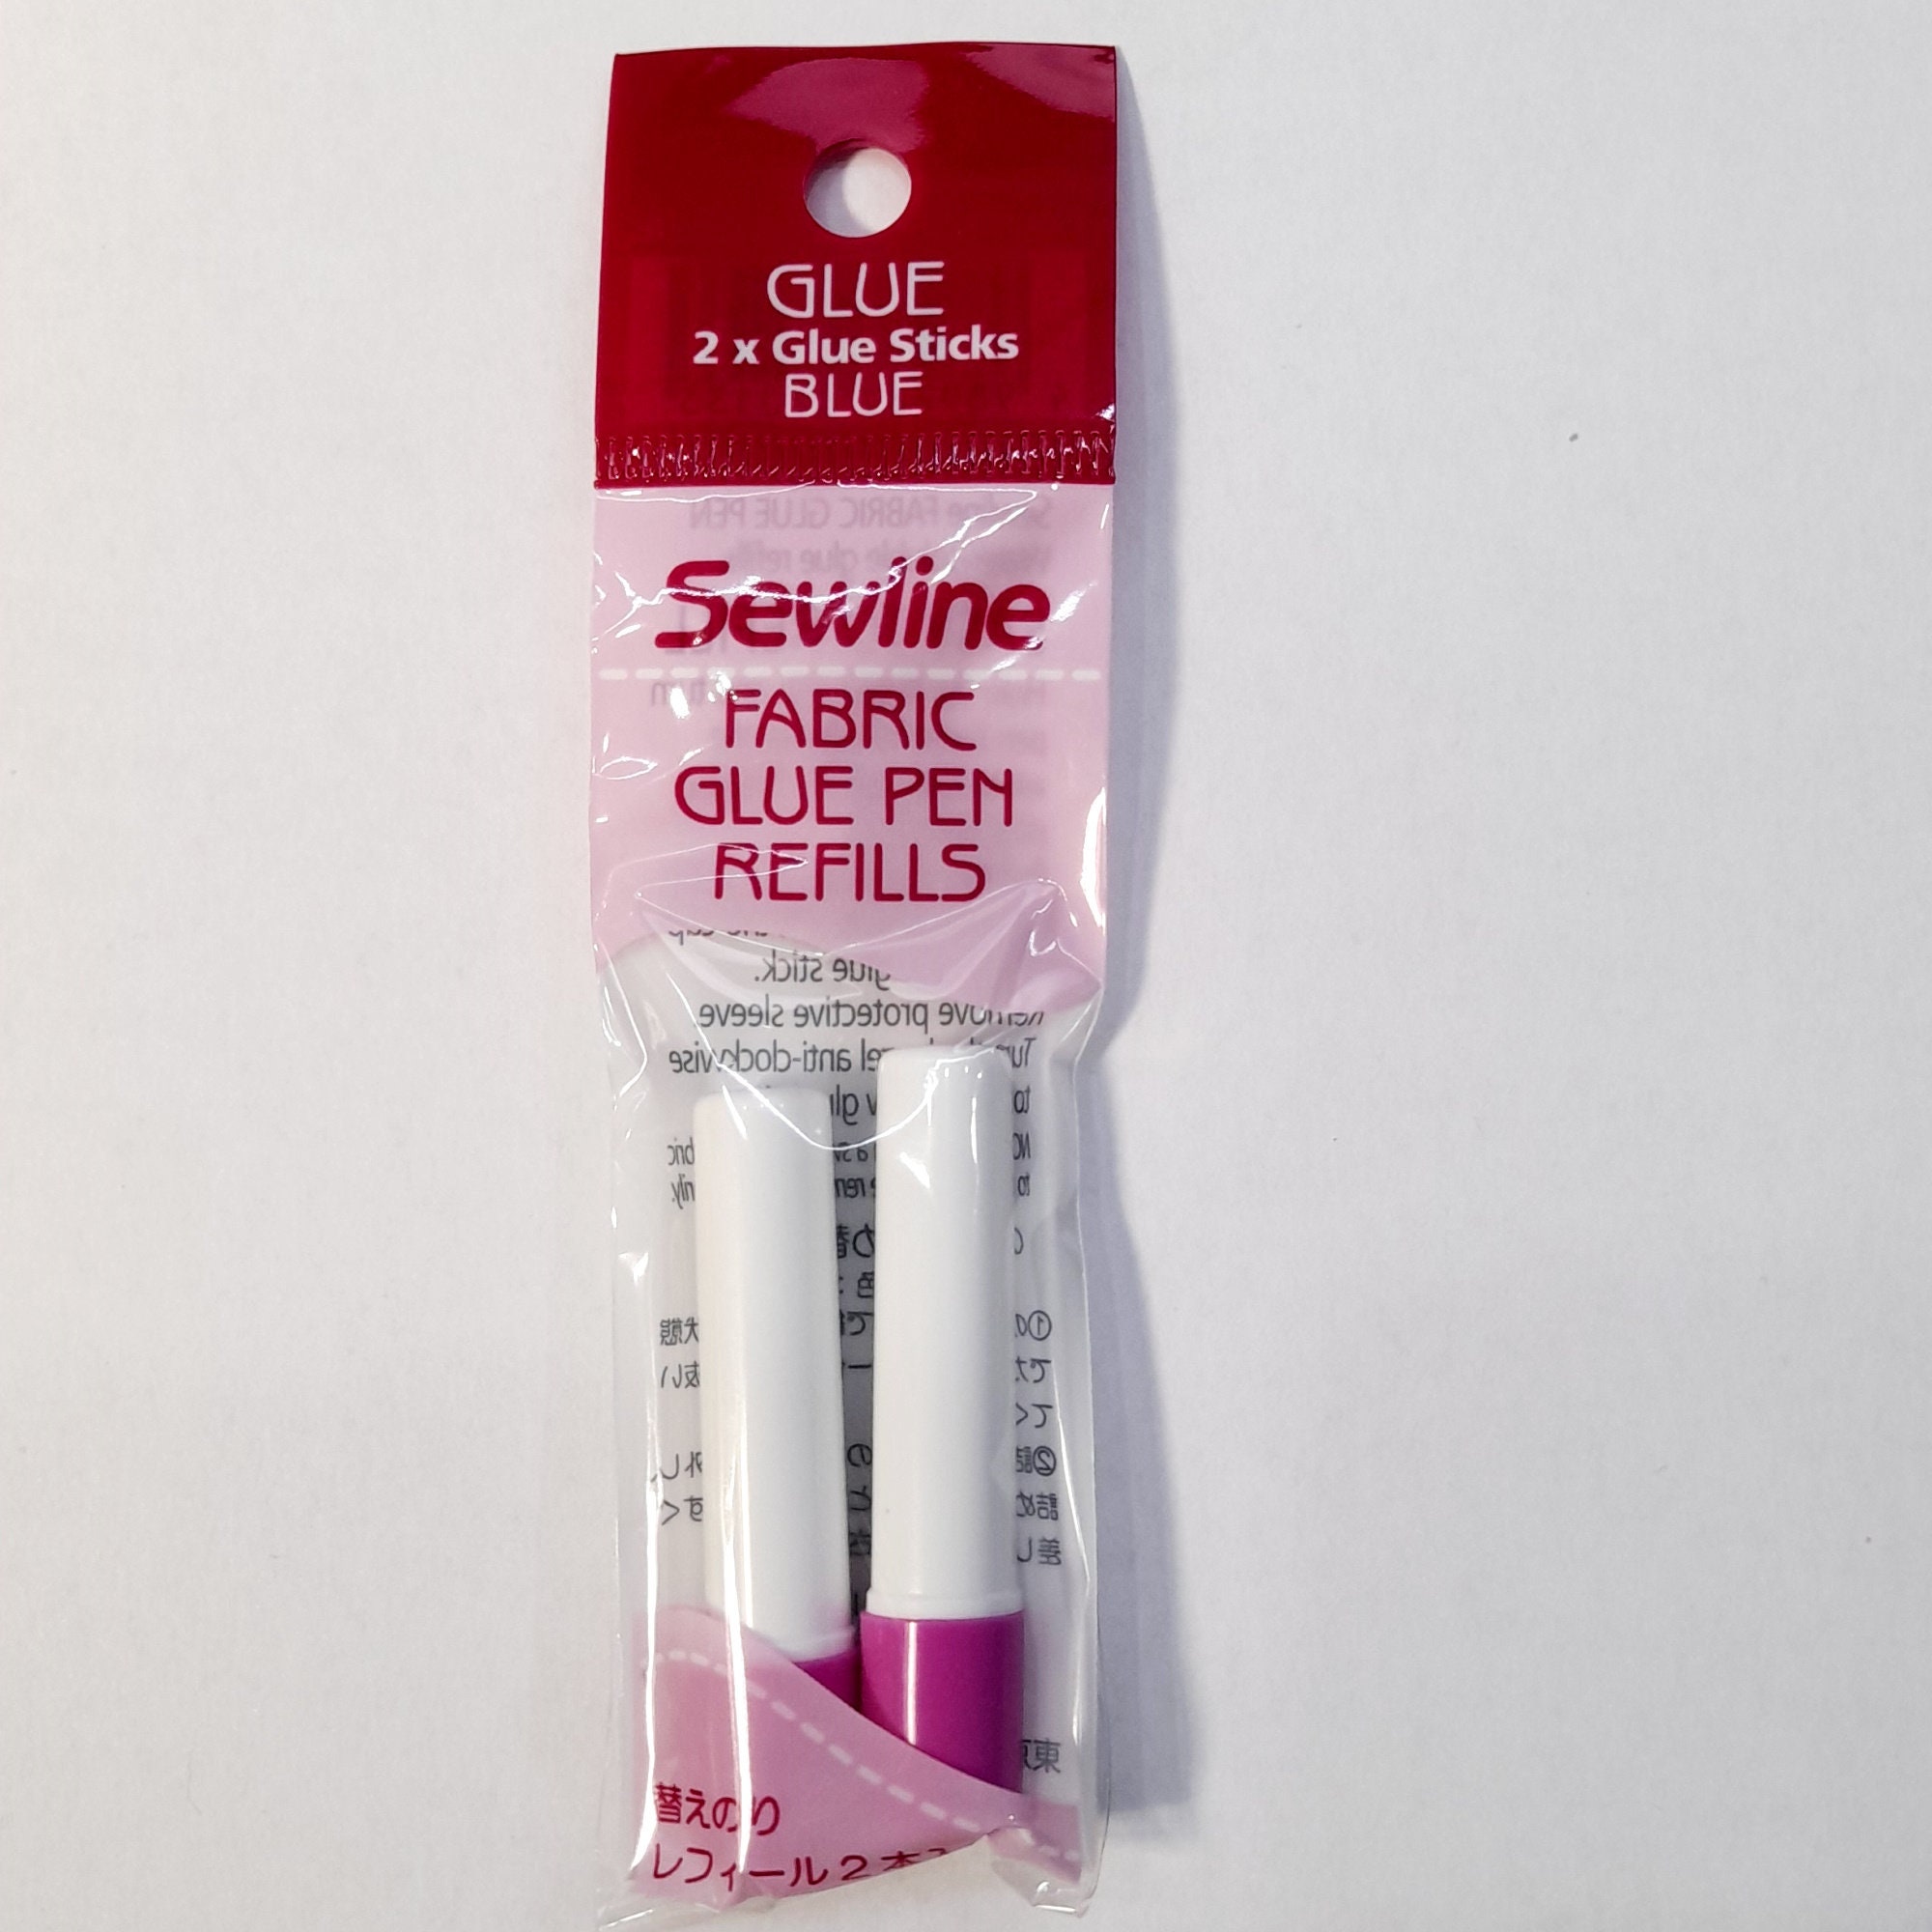 Premium Quality Sewline Blue Fabric Glue Pen Refill – Dries Clear - 6 Pack  for Fabrics, Quilting, Notions